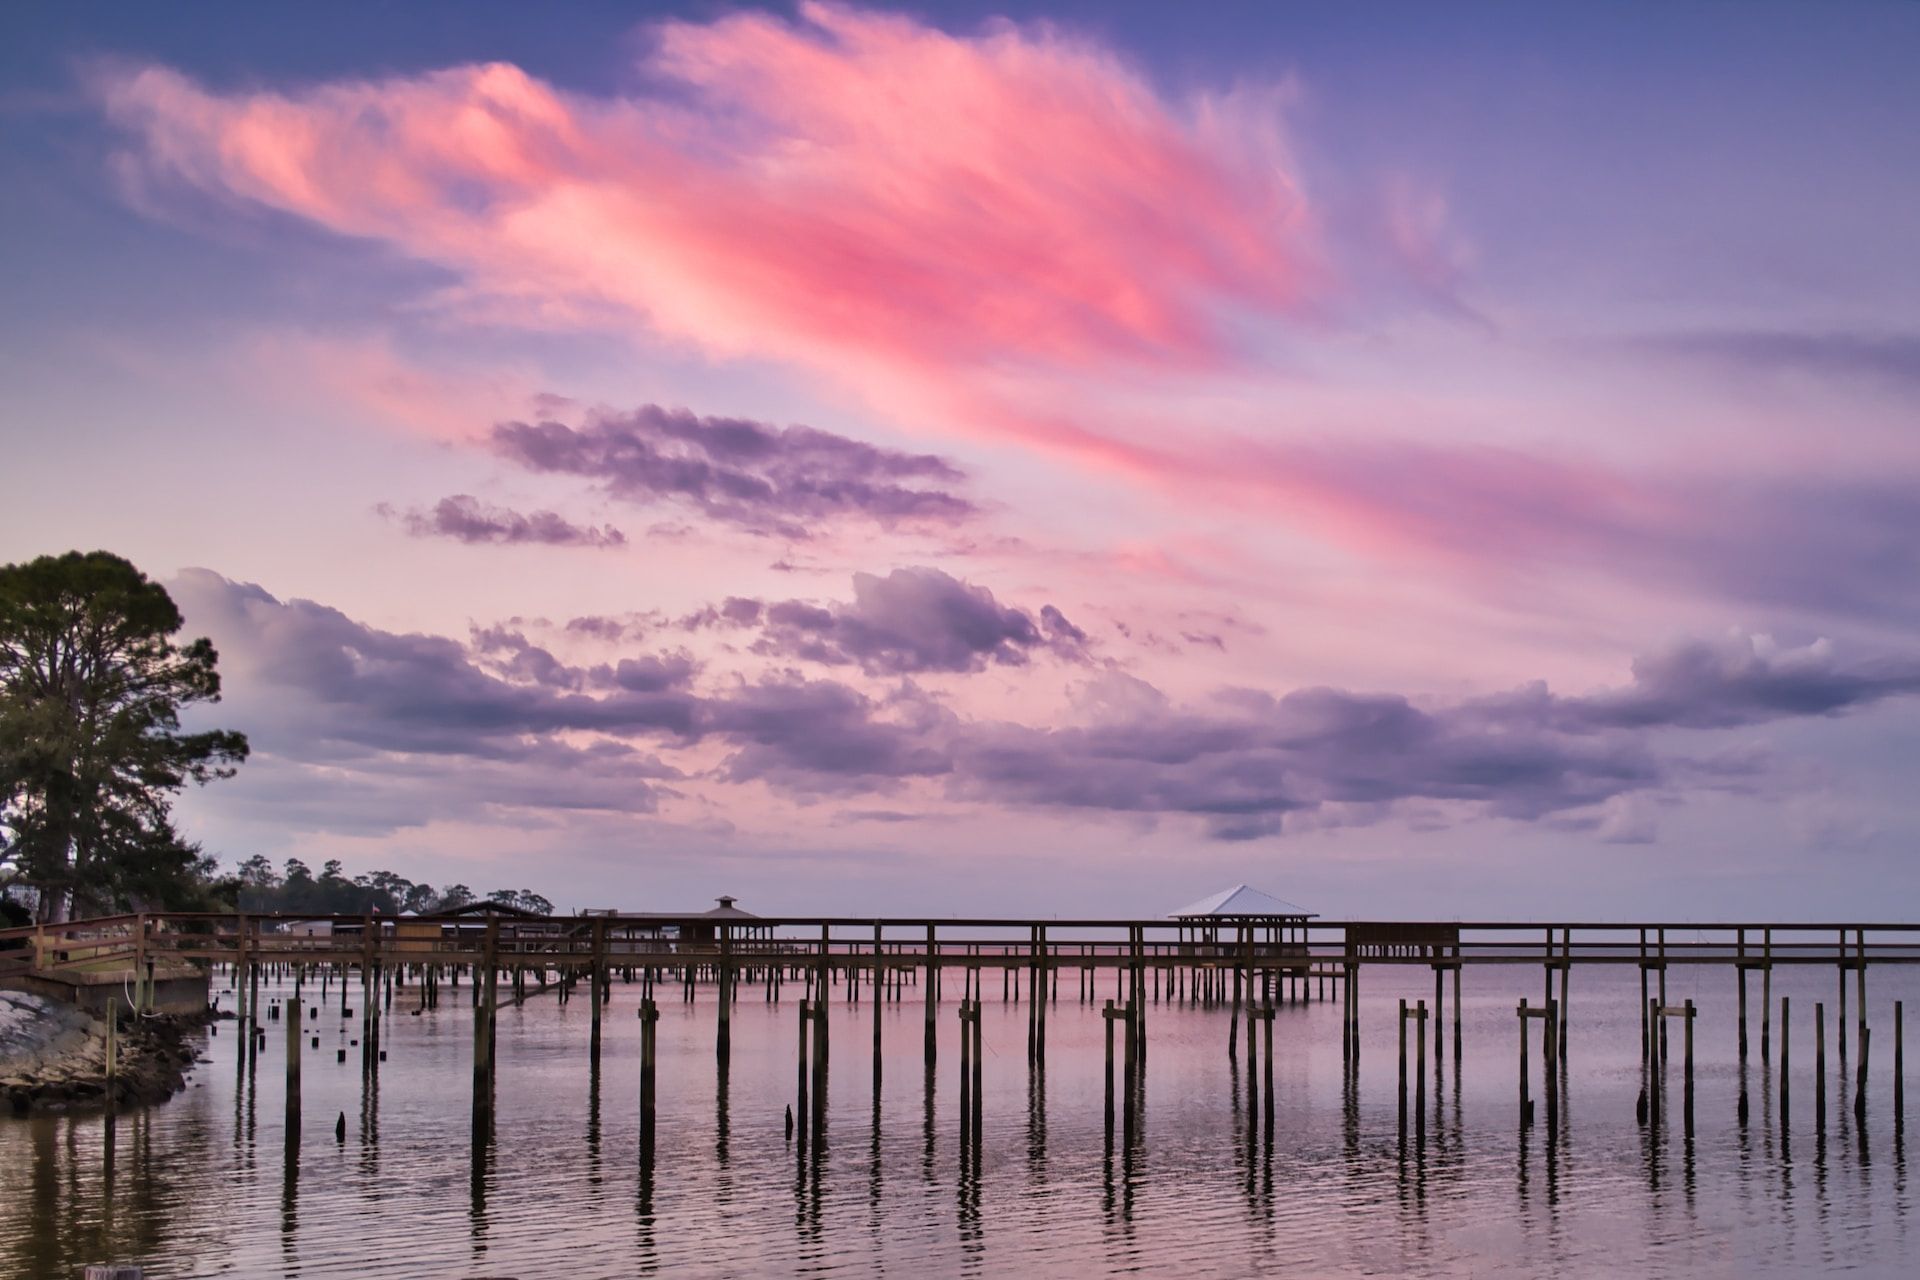 Pink and blue clouds during a sunset over the docks of Fairhope